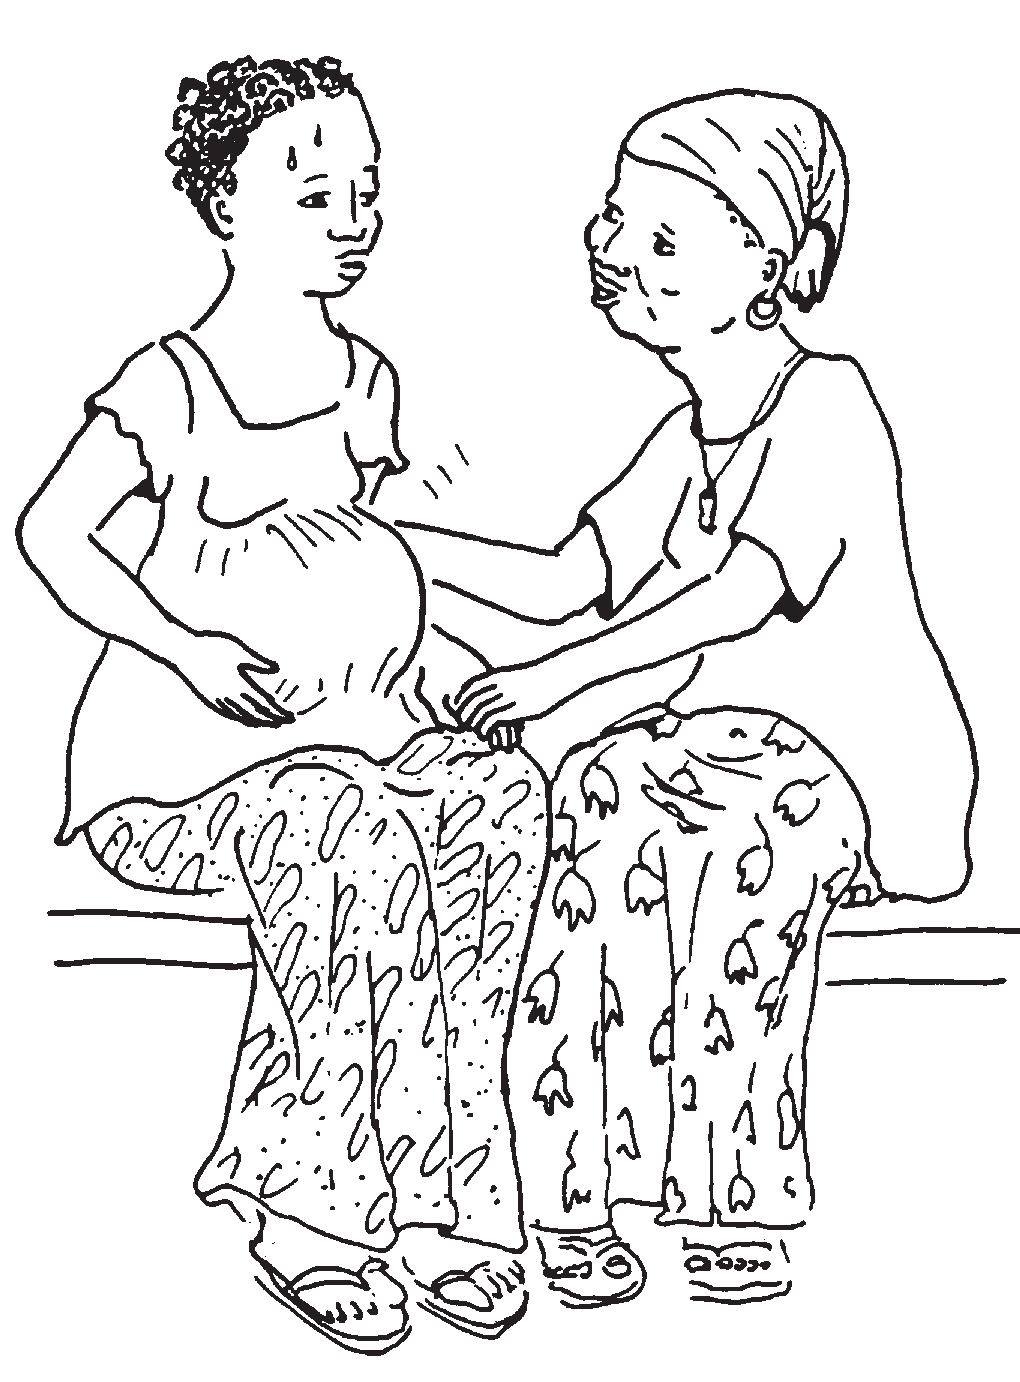 An illustration from Susan's midwifery manual.